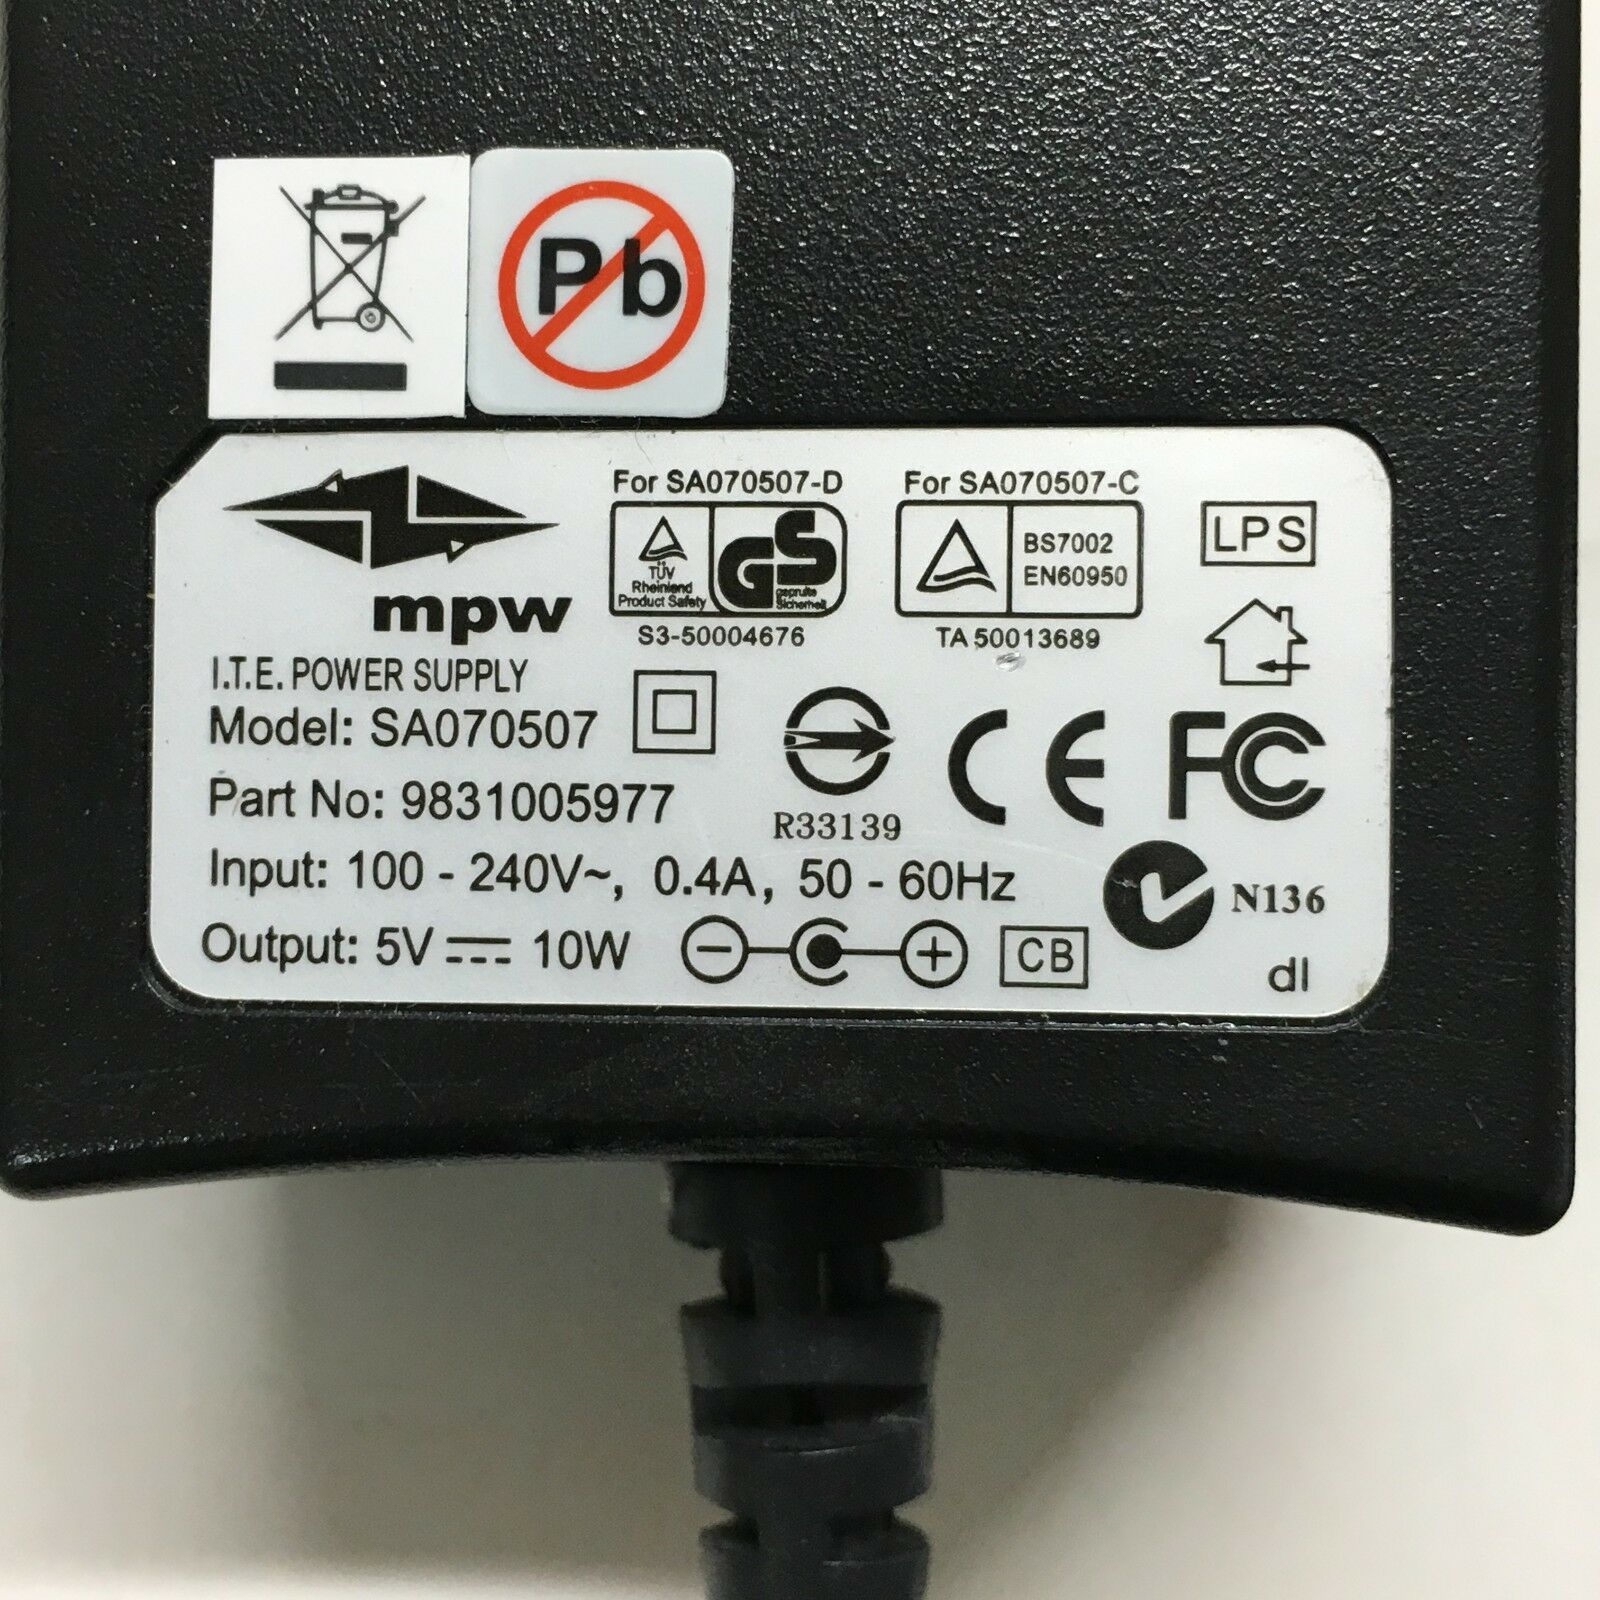 MPW 9831005977 AC Adapter Power Supply For Linksys Router SA070507 5 volt 10w part no:9831005977 Brand: MPW MPN: SY